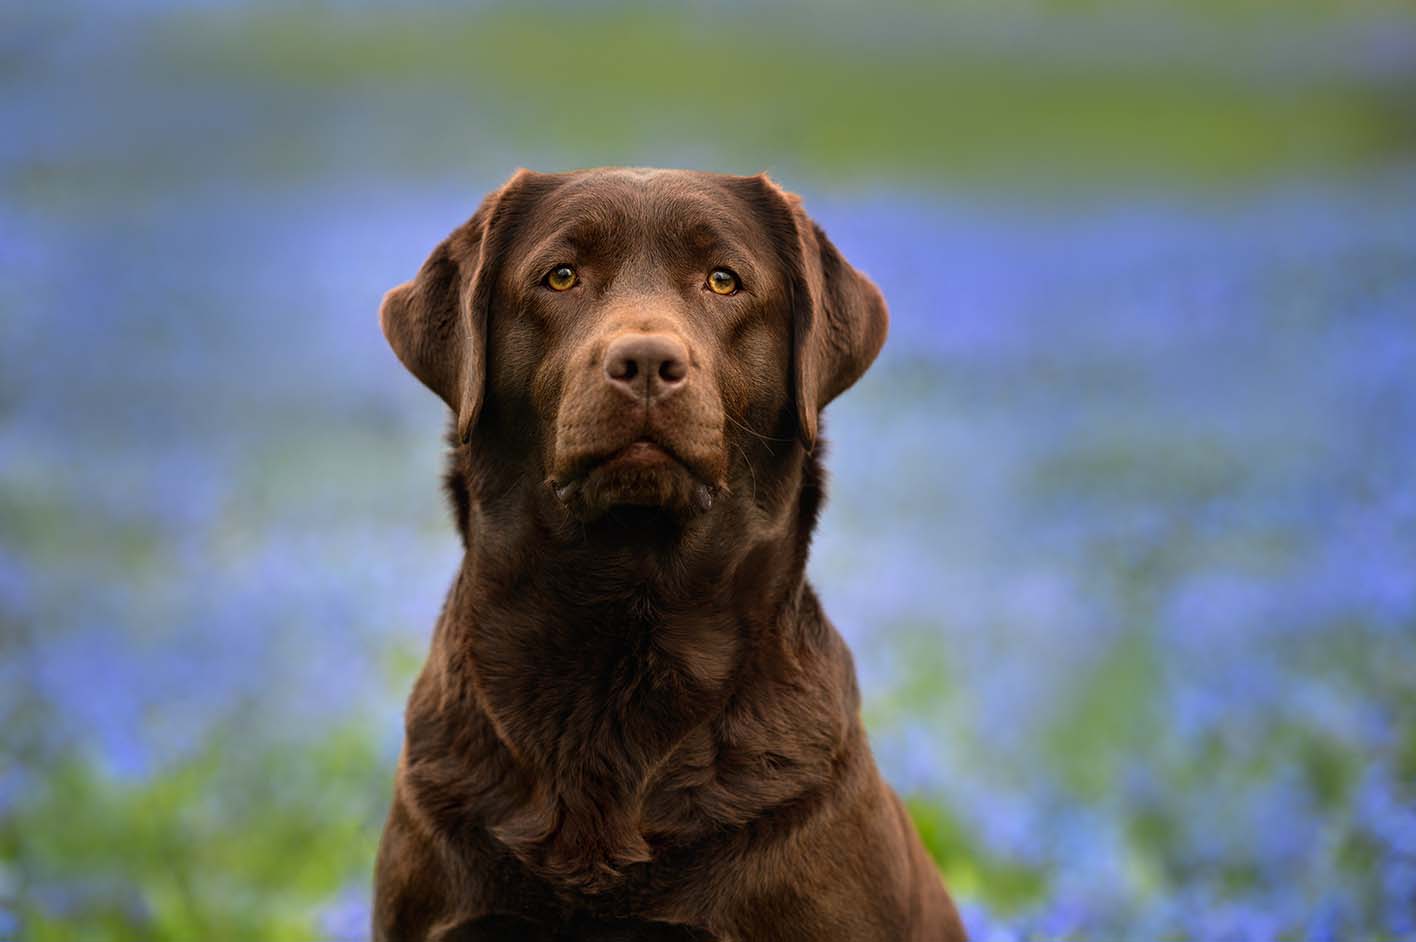 A brown Labrador Retriever sitting in front of a blue flower field, looking directly at the camera.